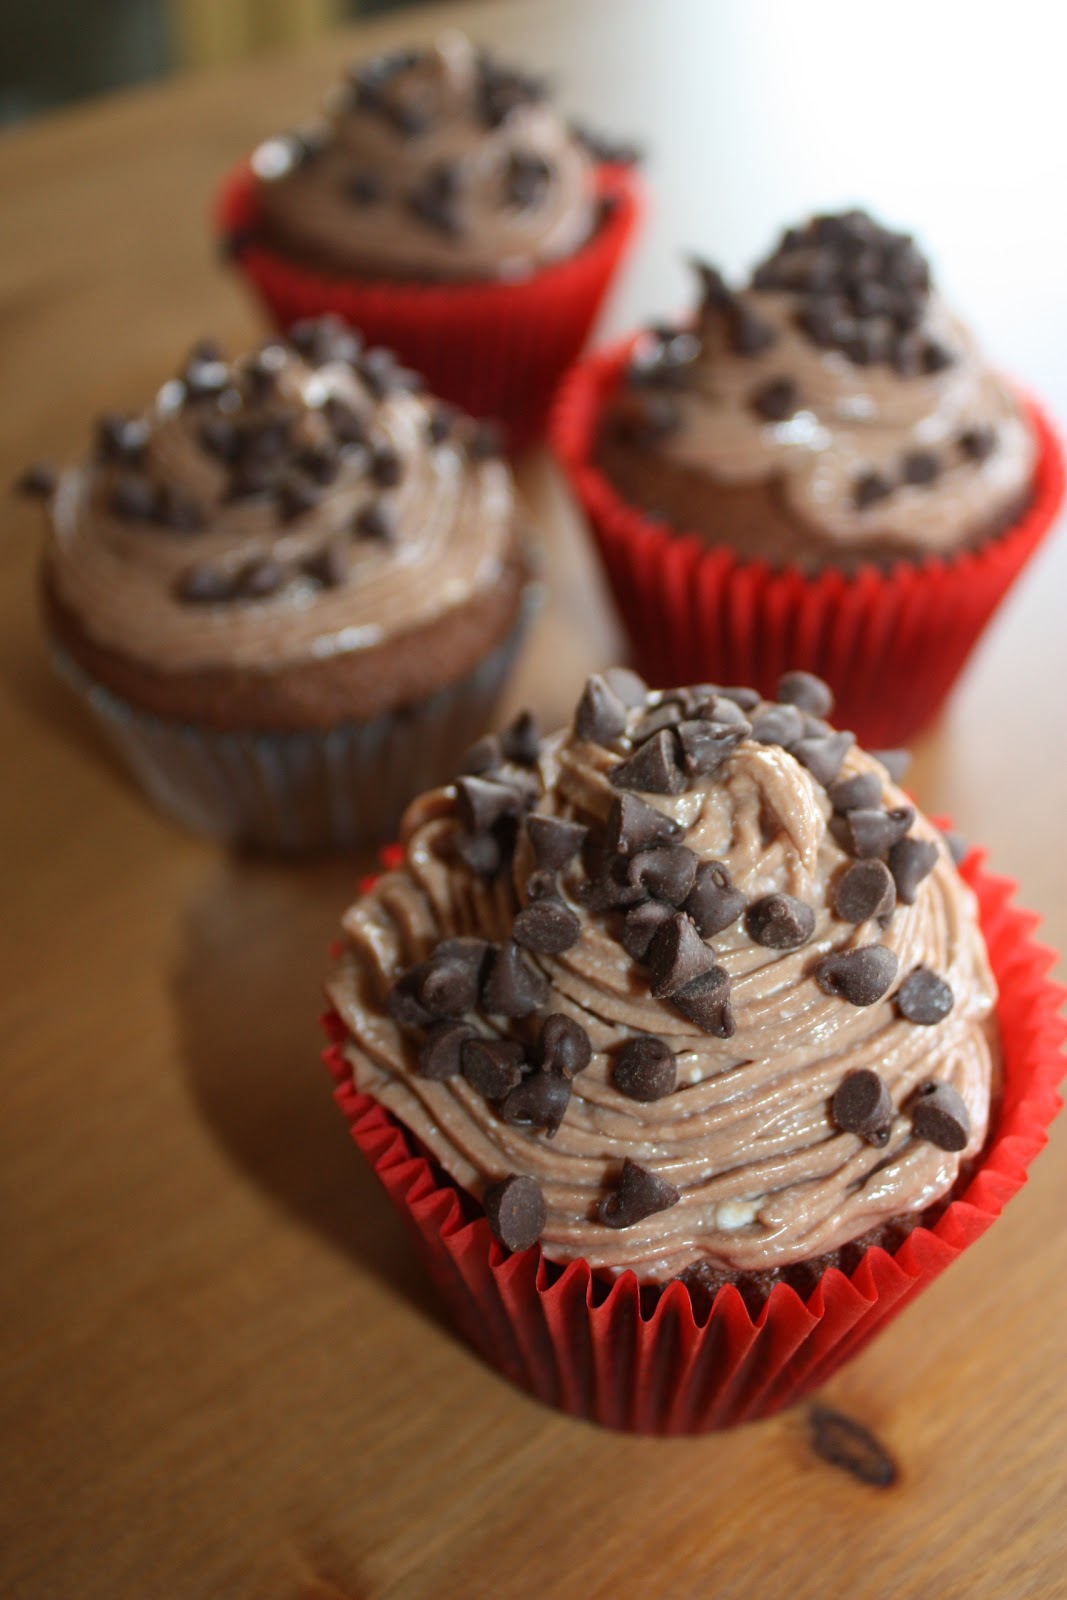 Olive The Ingredients: Nutella Cupcakes